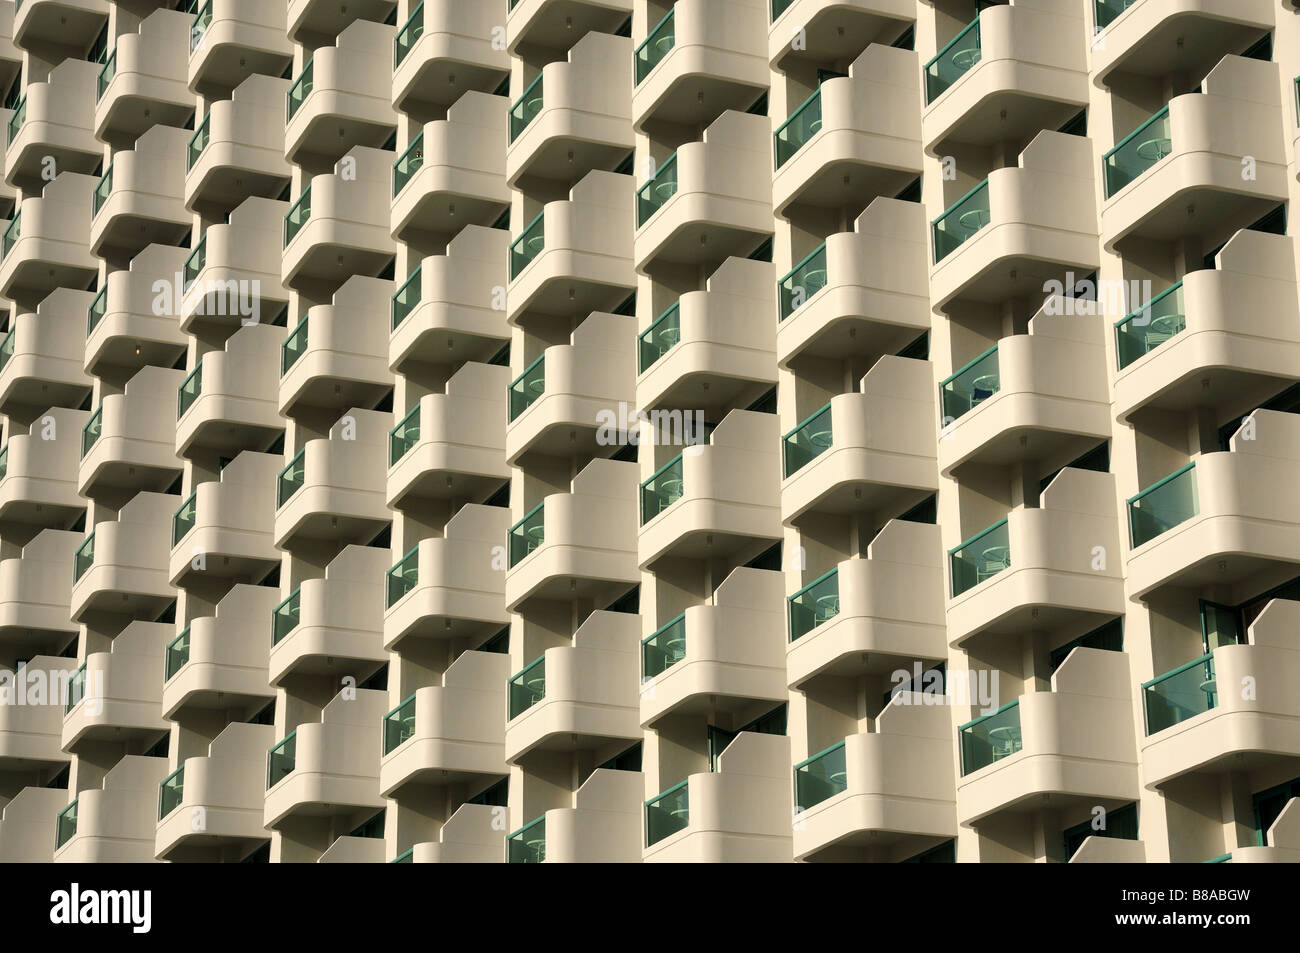 Facade of residential building with balconies Stock Photo